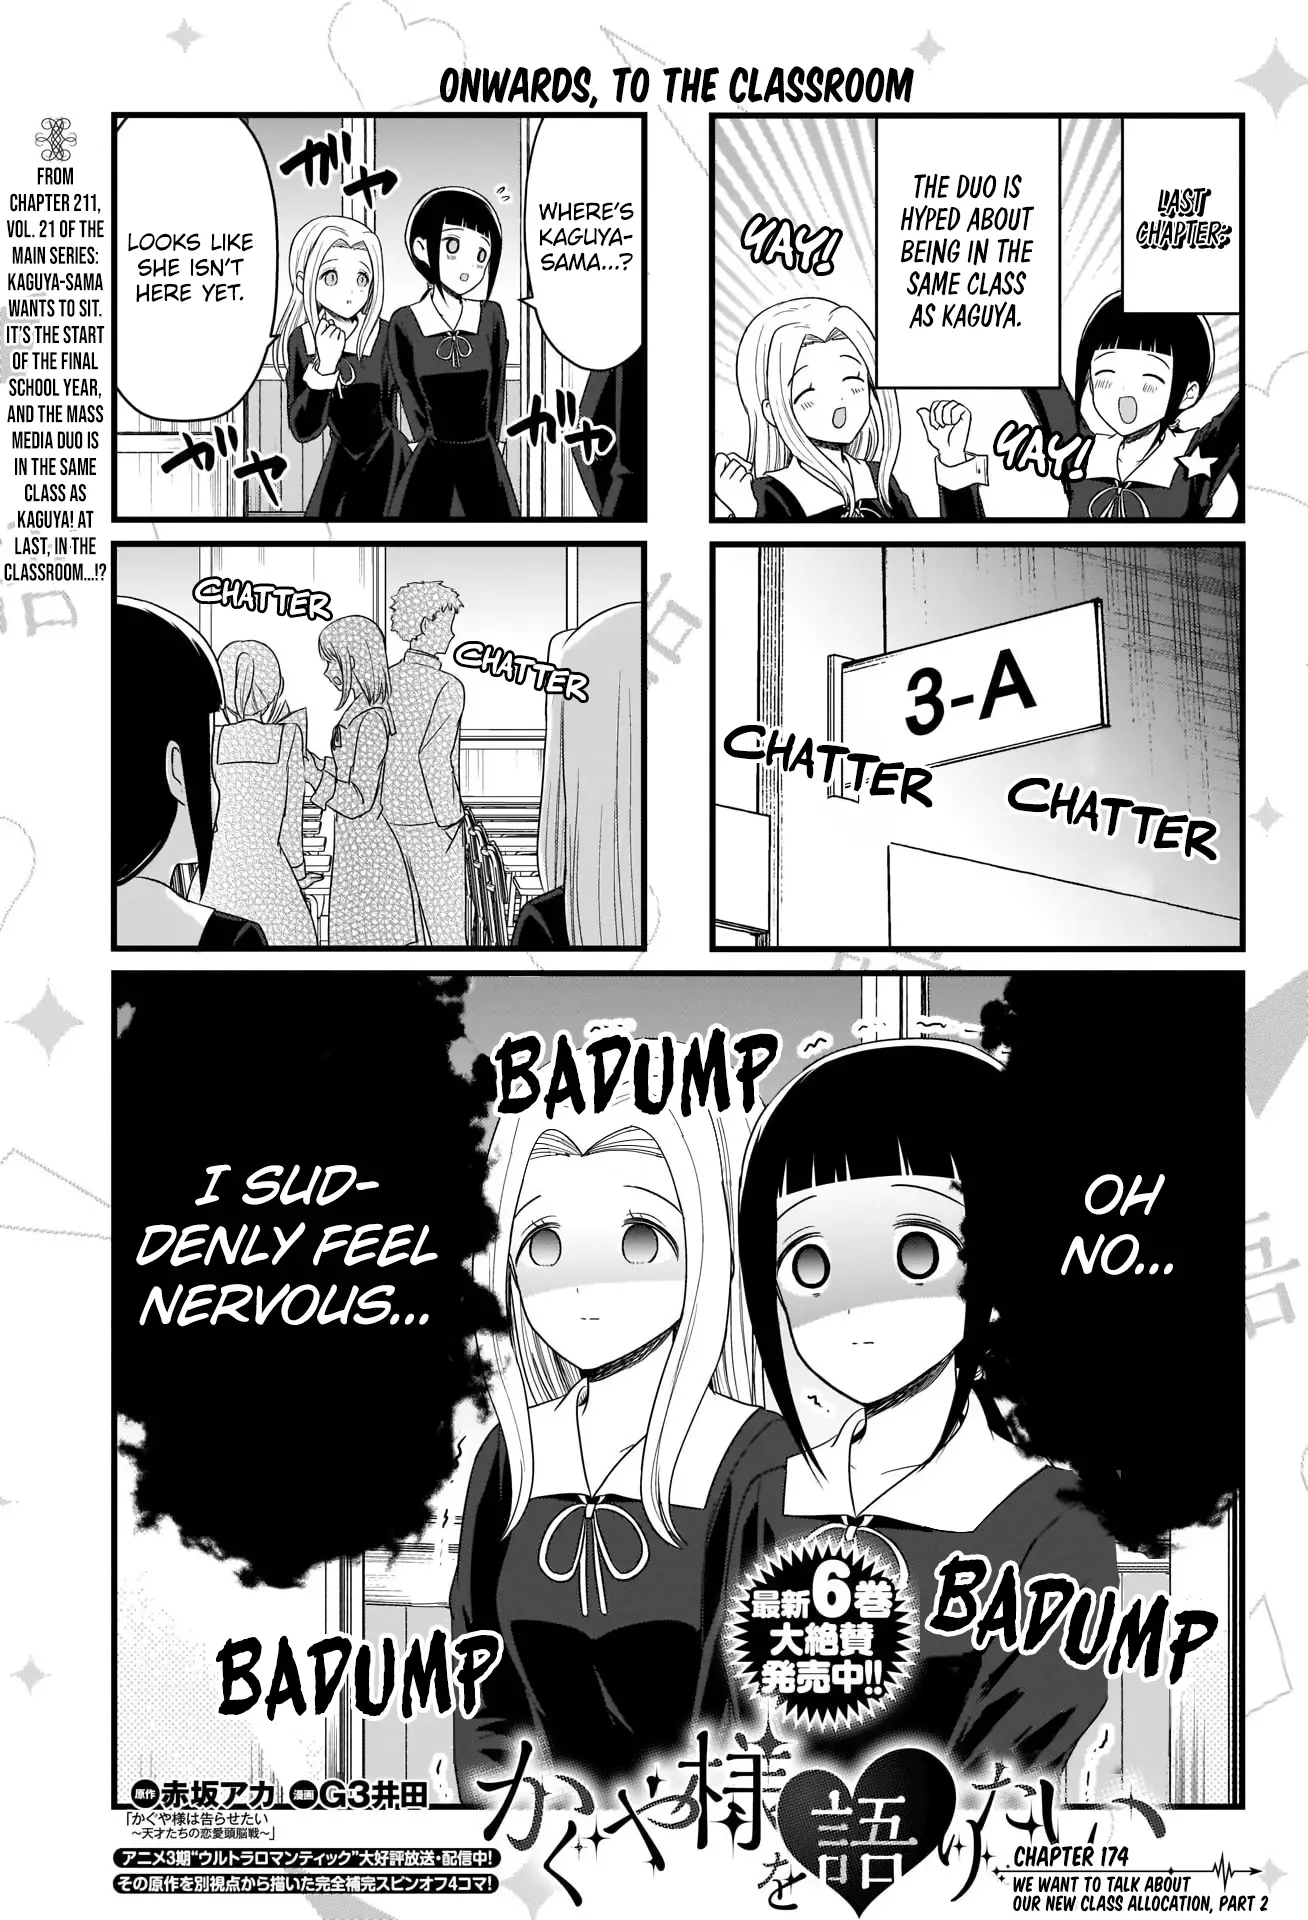 We Want To Talk About Kaguya - 174 page 1-0b1dd361